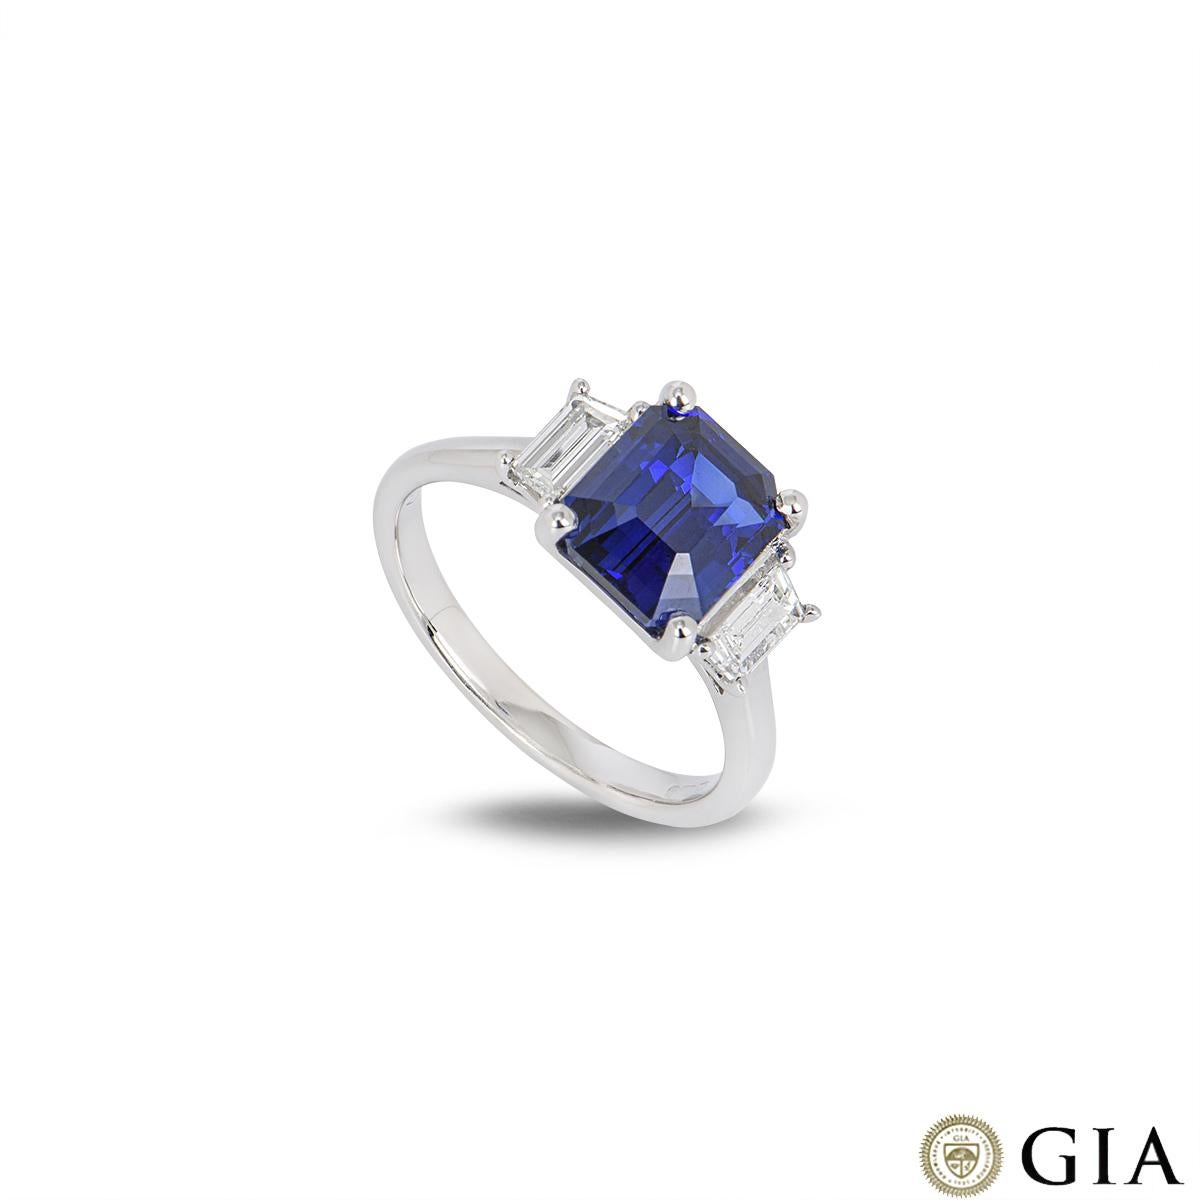 GIA Certified Royal Blue Sapphire & Diamond Ring 3.04ct For Sale 3